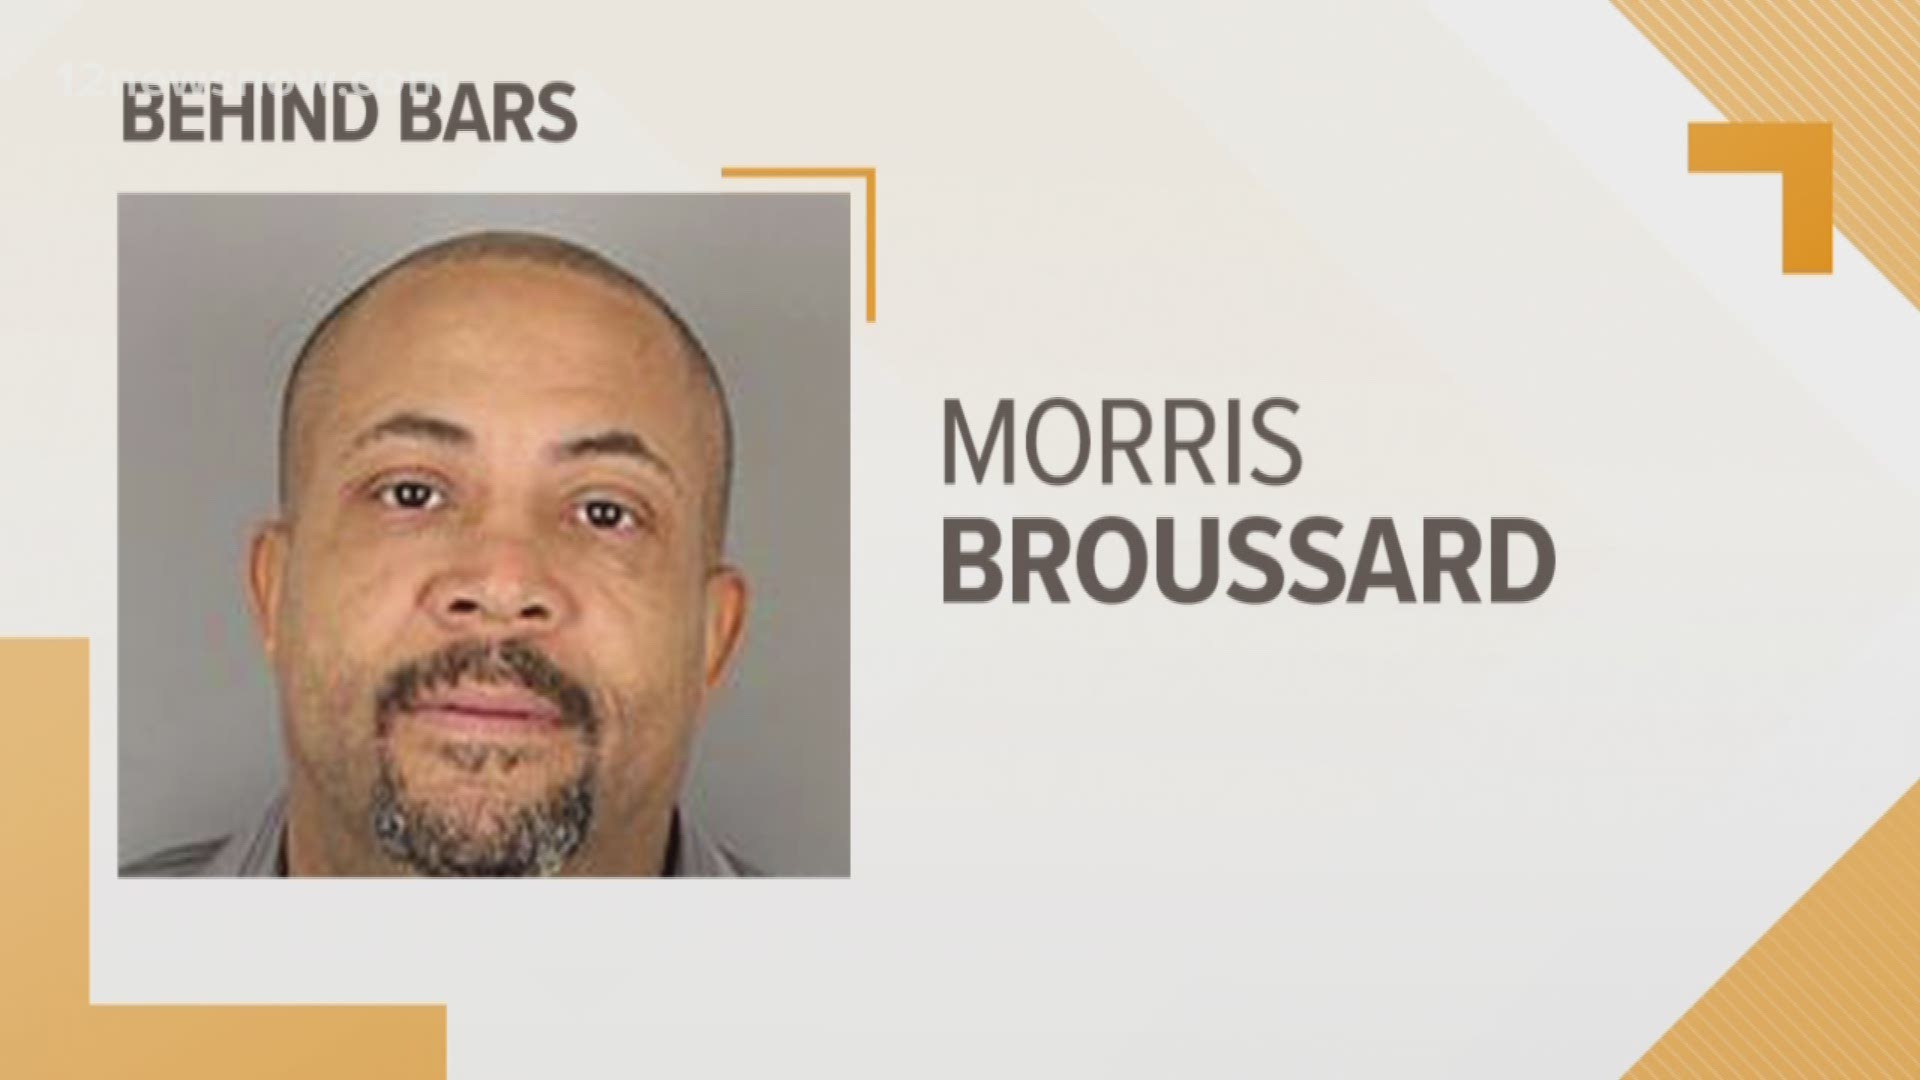 48 year old, Morris Broussard, is arrested after he is accused of kidnapping, sexually assaulting, and shooting a woman in the hand in Beaumont. Broussard denies any involvement.